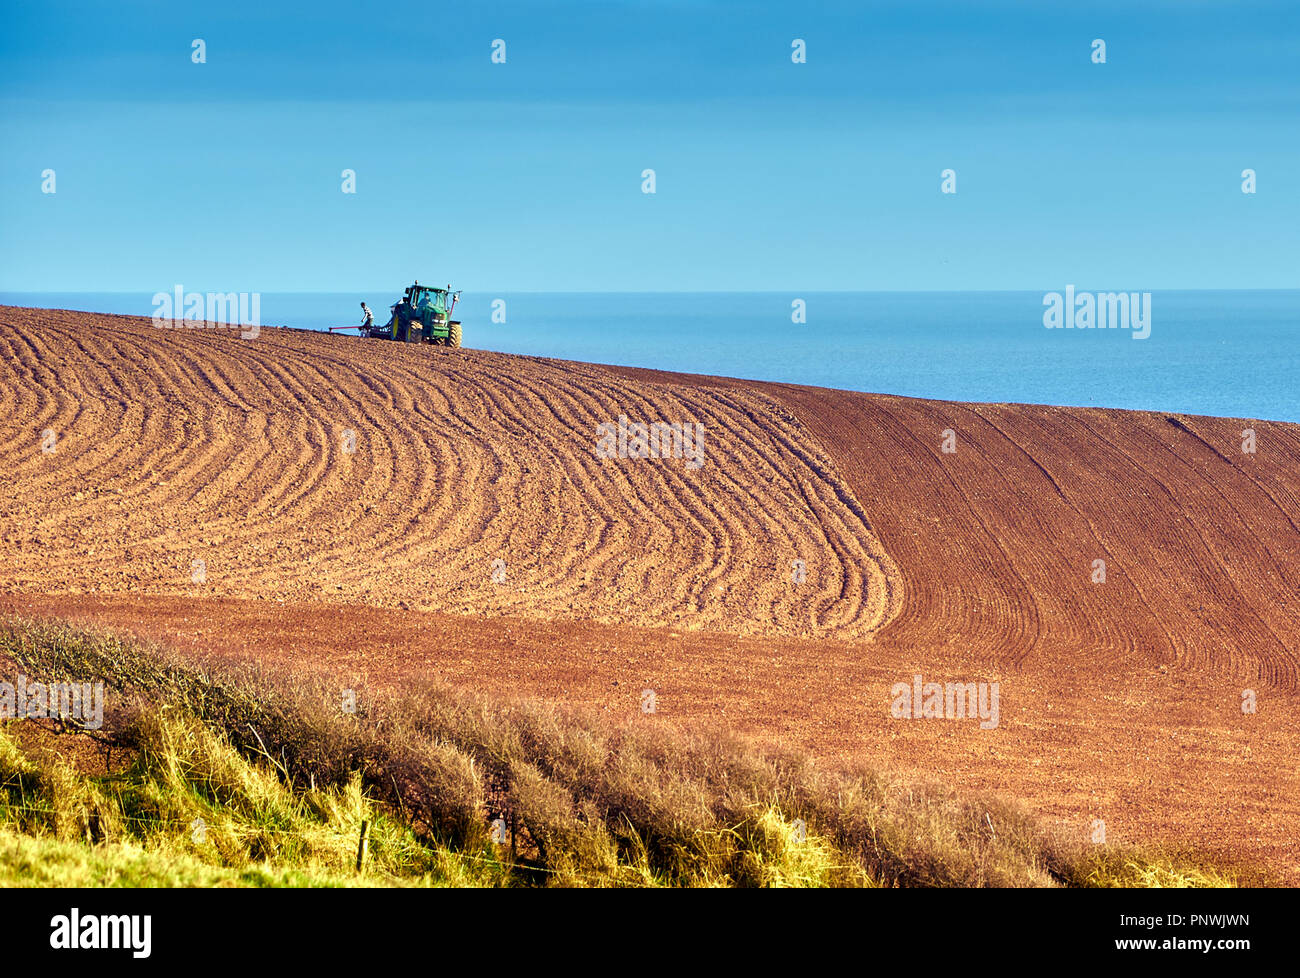 Tractor pulling a seed drill across a ploughed field in Devon, U.K. Stock Photo